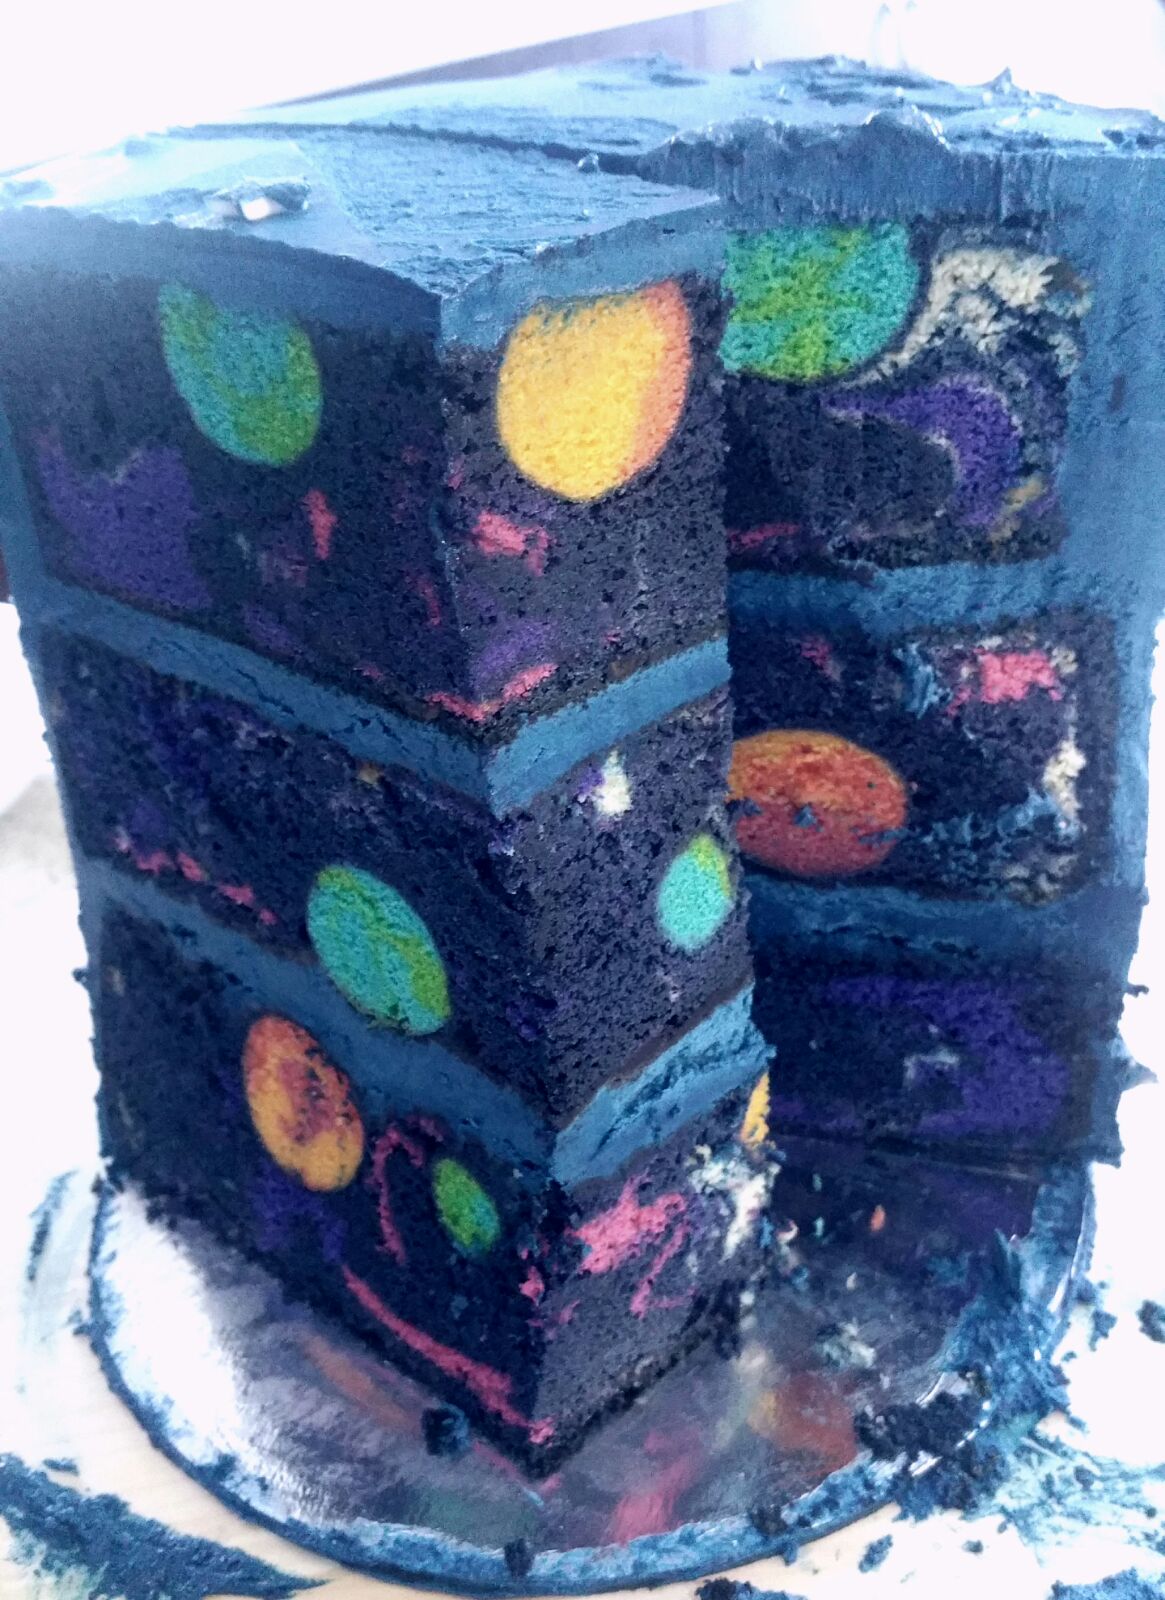 Space Birthday Cake Reveals an Out-of-This-World Surprise When Sliced